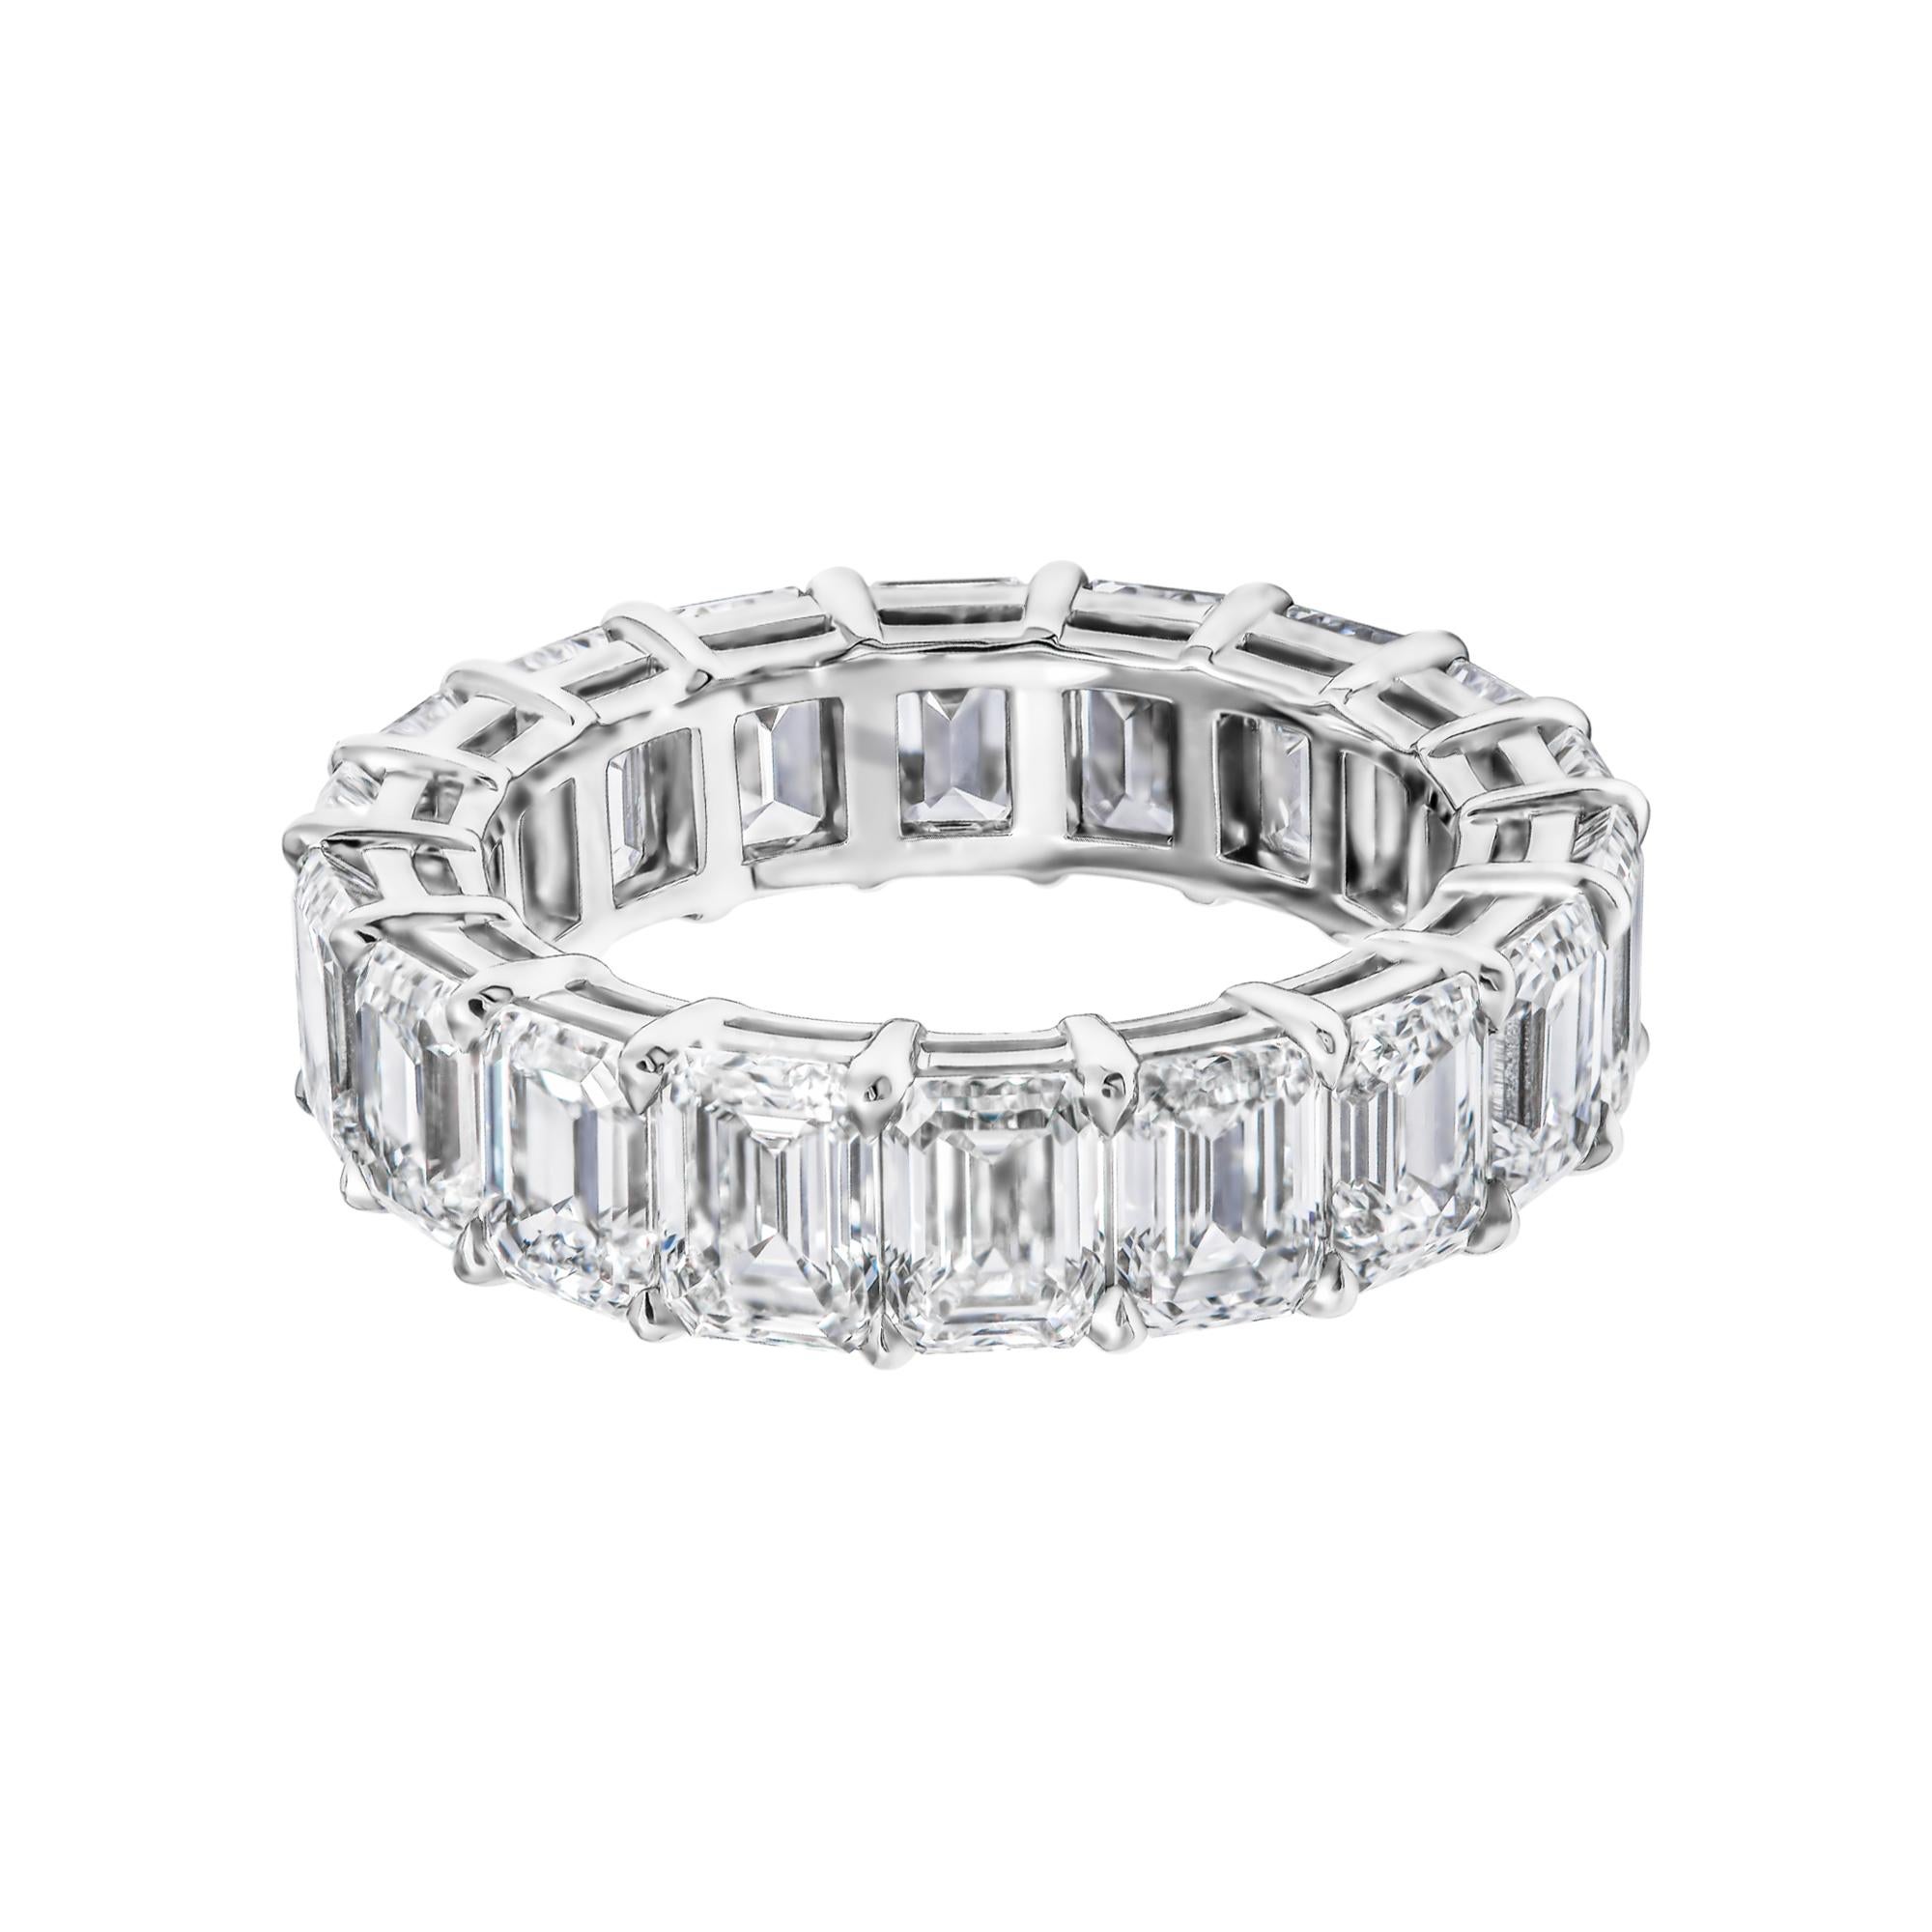 The most wanted piece of jewelry in 2021, timeless, edgy, and stylish!
Handcrafted Band, the highest quality of mounting you will find! Delicate yet sturdy Mounted in Platinum 950, 18 GIA Certified emeralds cut diamonds totaling 9.33ct total, 0.5ct